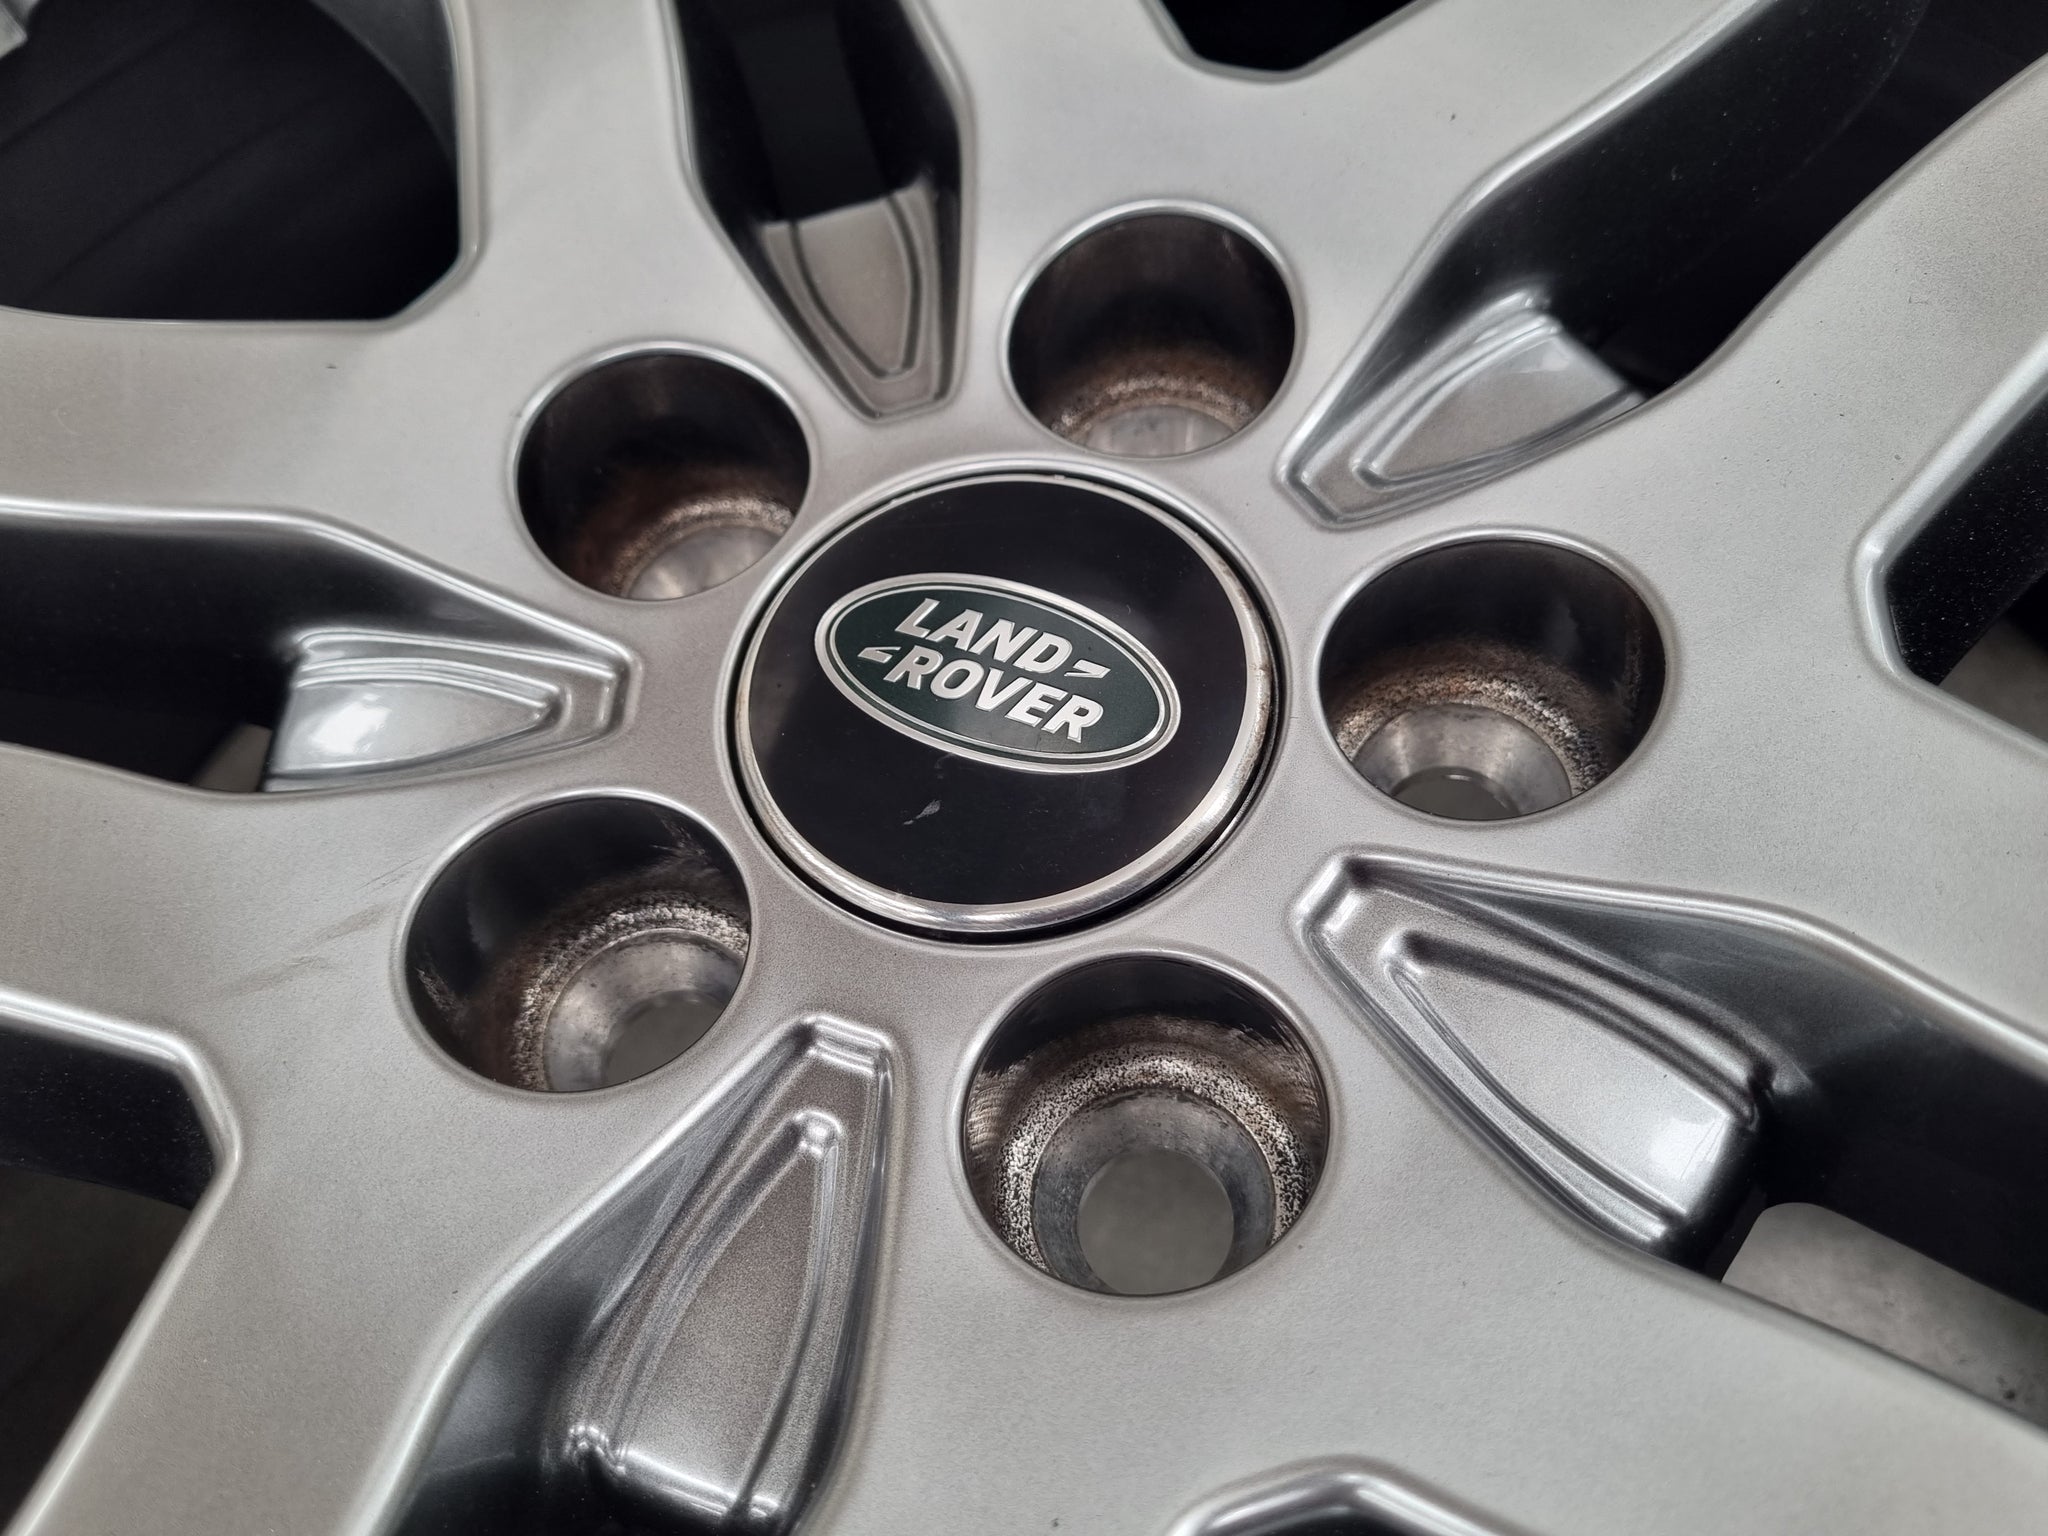 Load image into Gallery viewer, Genuine Range Rover Evoque Shadow 20 Inch Alloy Wheels Set of 4
